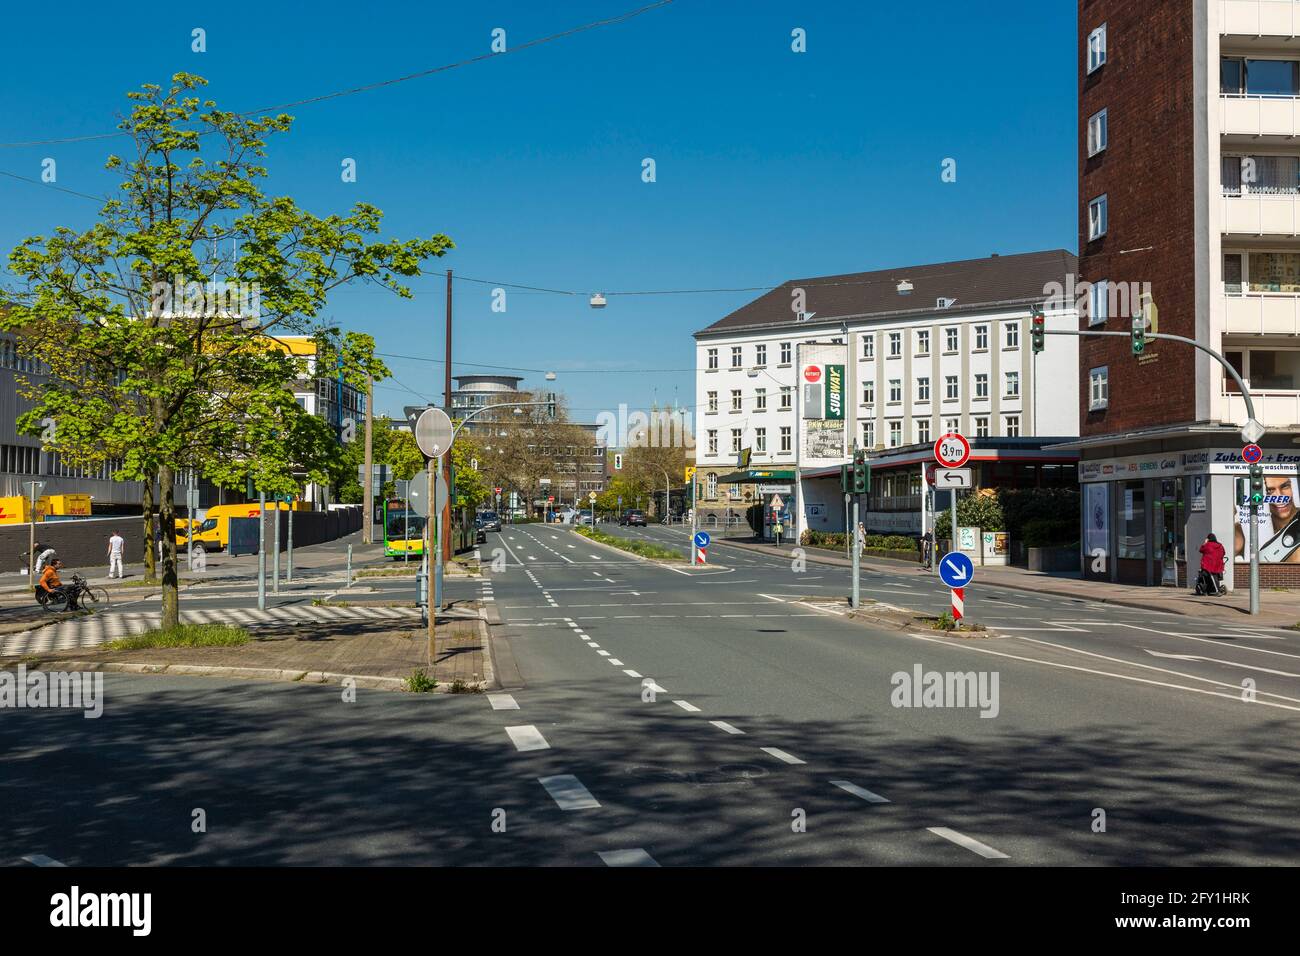 Germany, Oberhausen, Alt-Oberhausen, Ruhr area, Lower Rhine, Rhineland, North Rhine-Westphalia, NRW, view along the Friedrich Karl Strasse towards German Post and Central Station and also to the Labour Court Oberhausen, main road Stock Photo